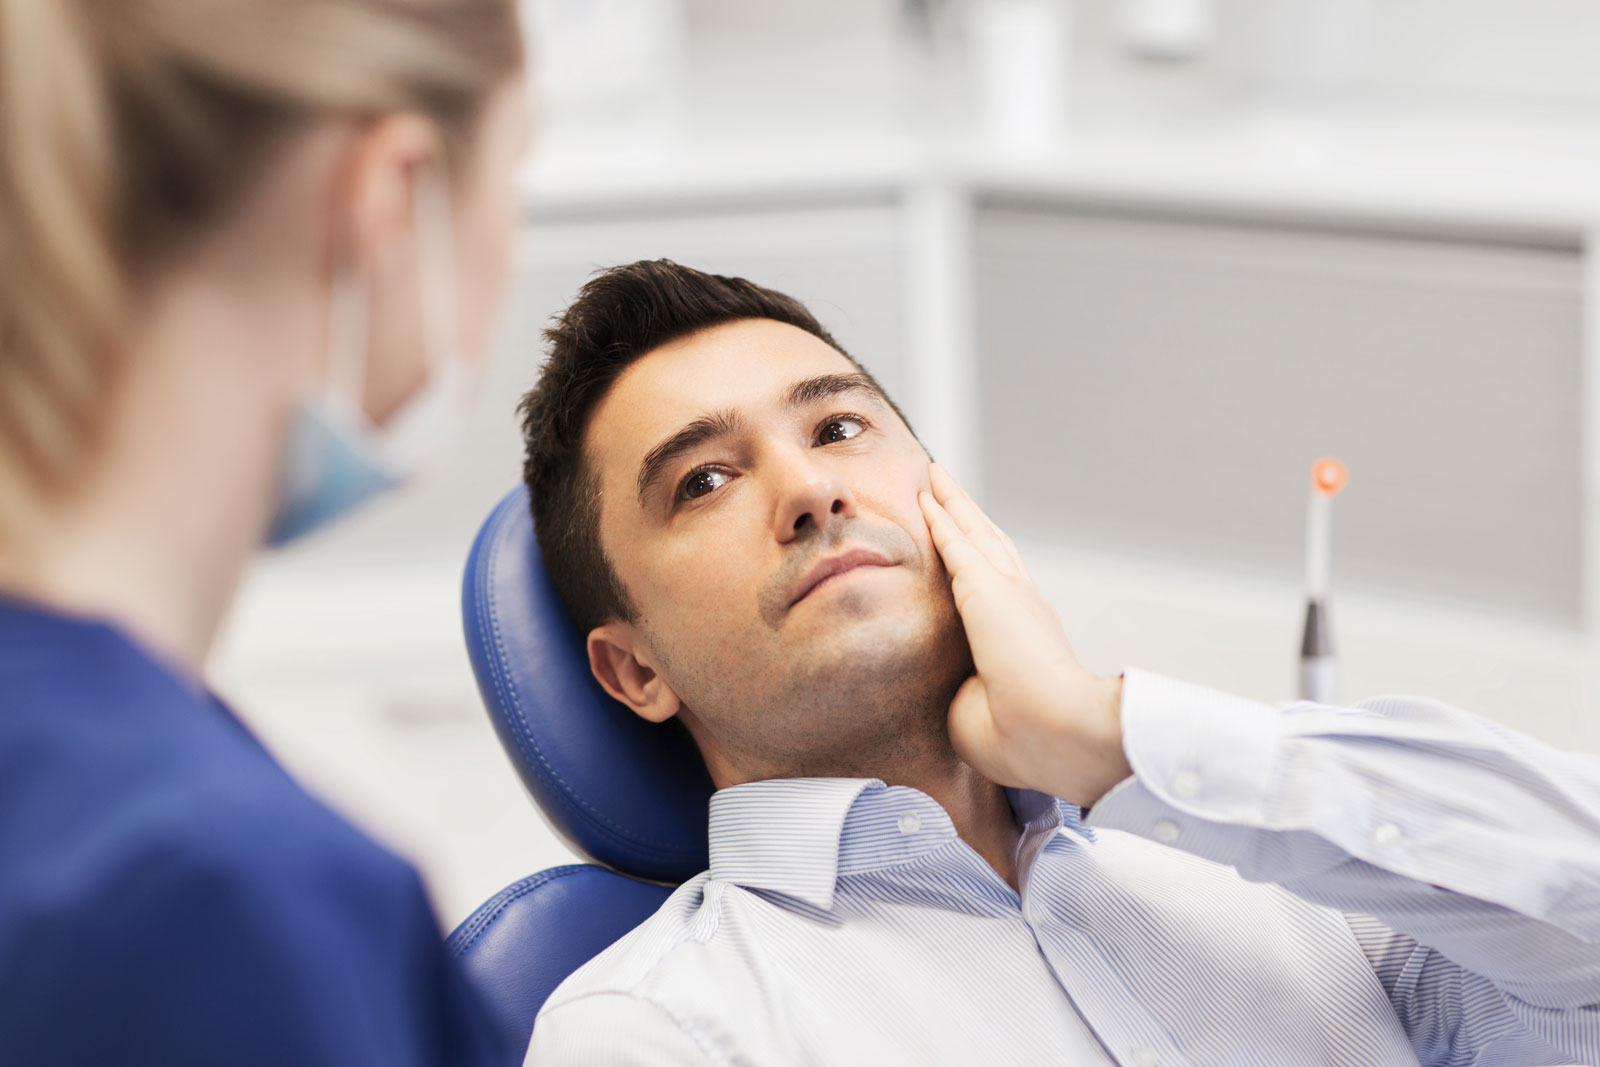 What Happens If I Don’t Have My Wisdom Teeth Removed?